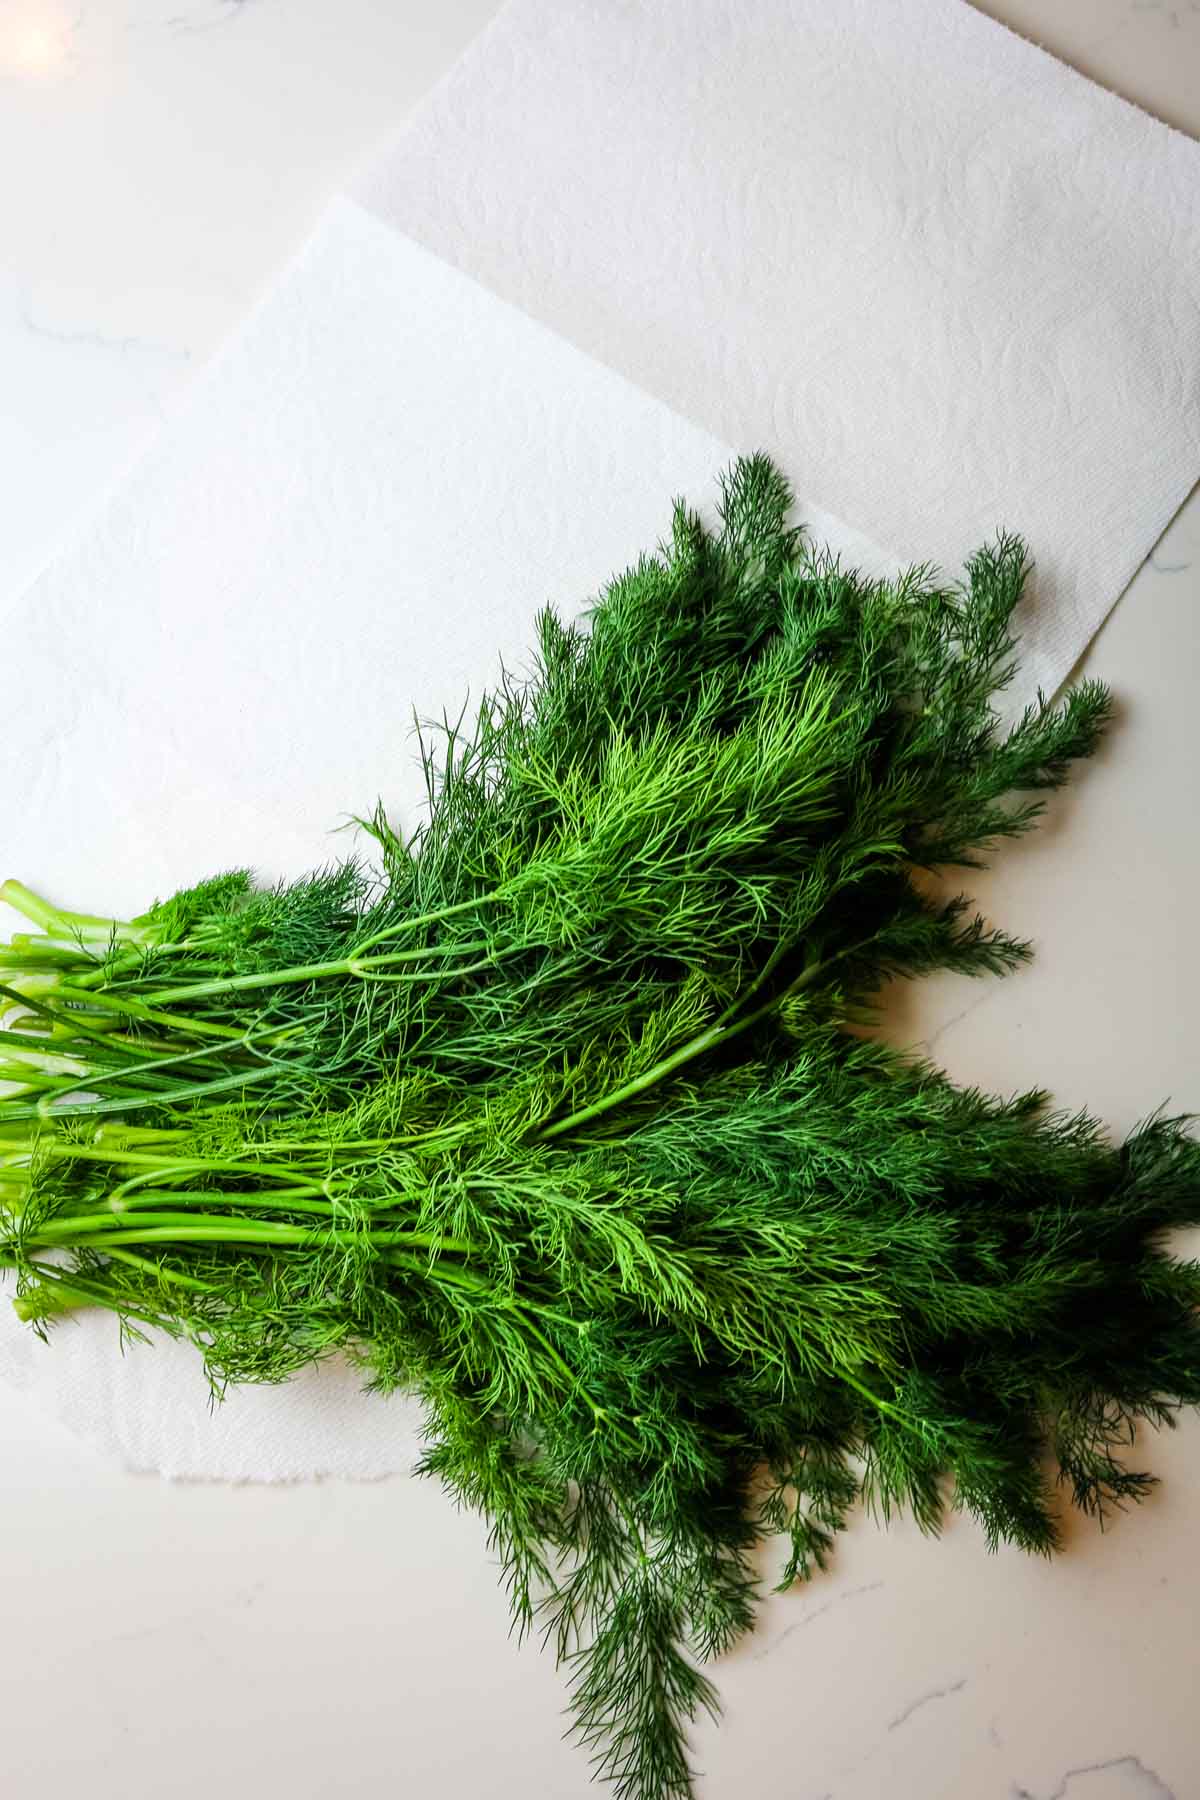 washed and dried dill on paper towel for a post on how to chop dill.